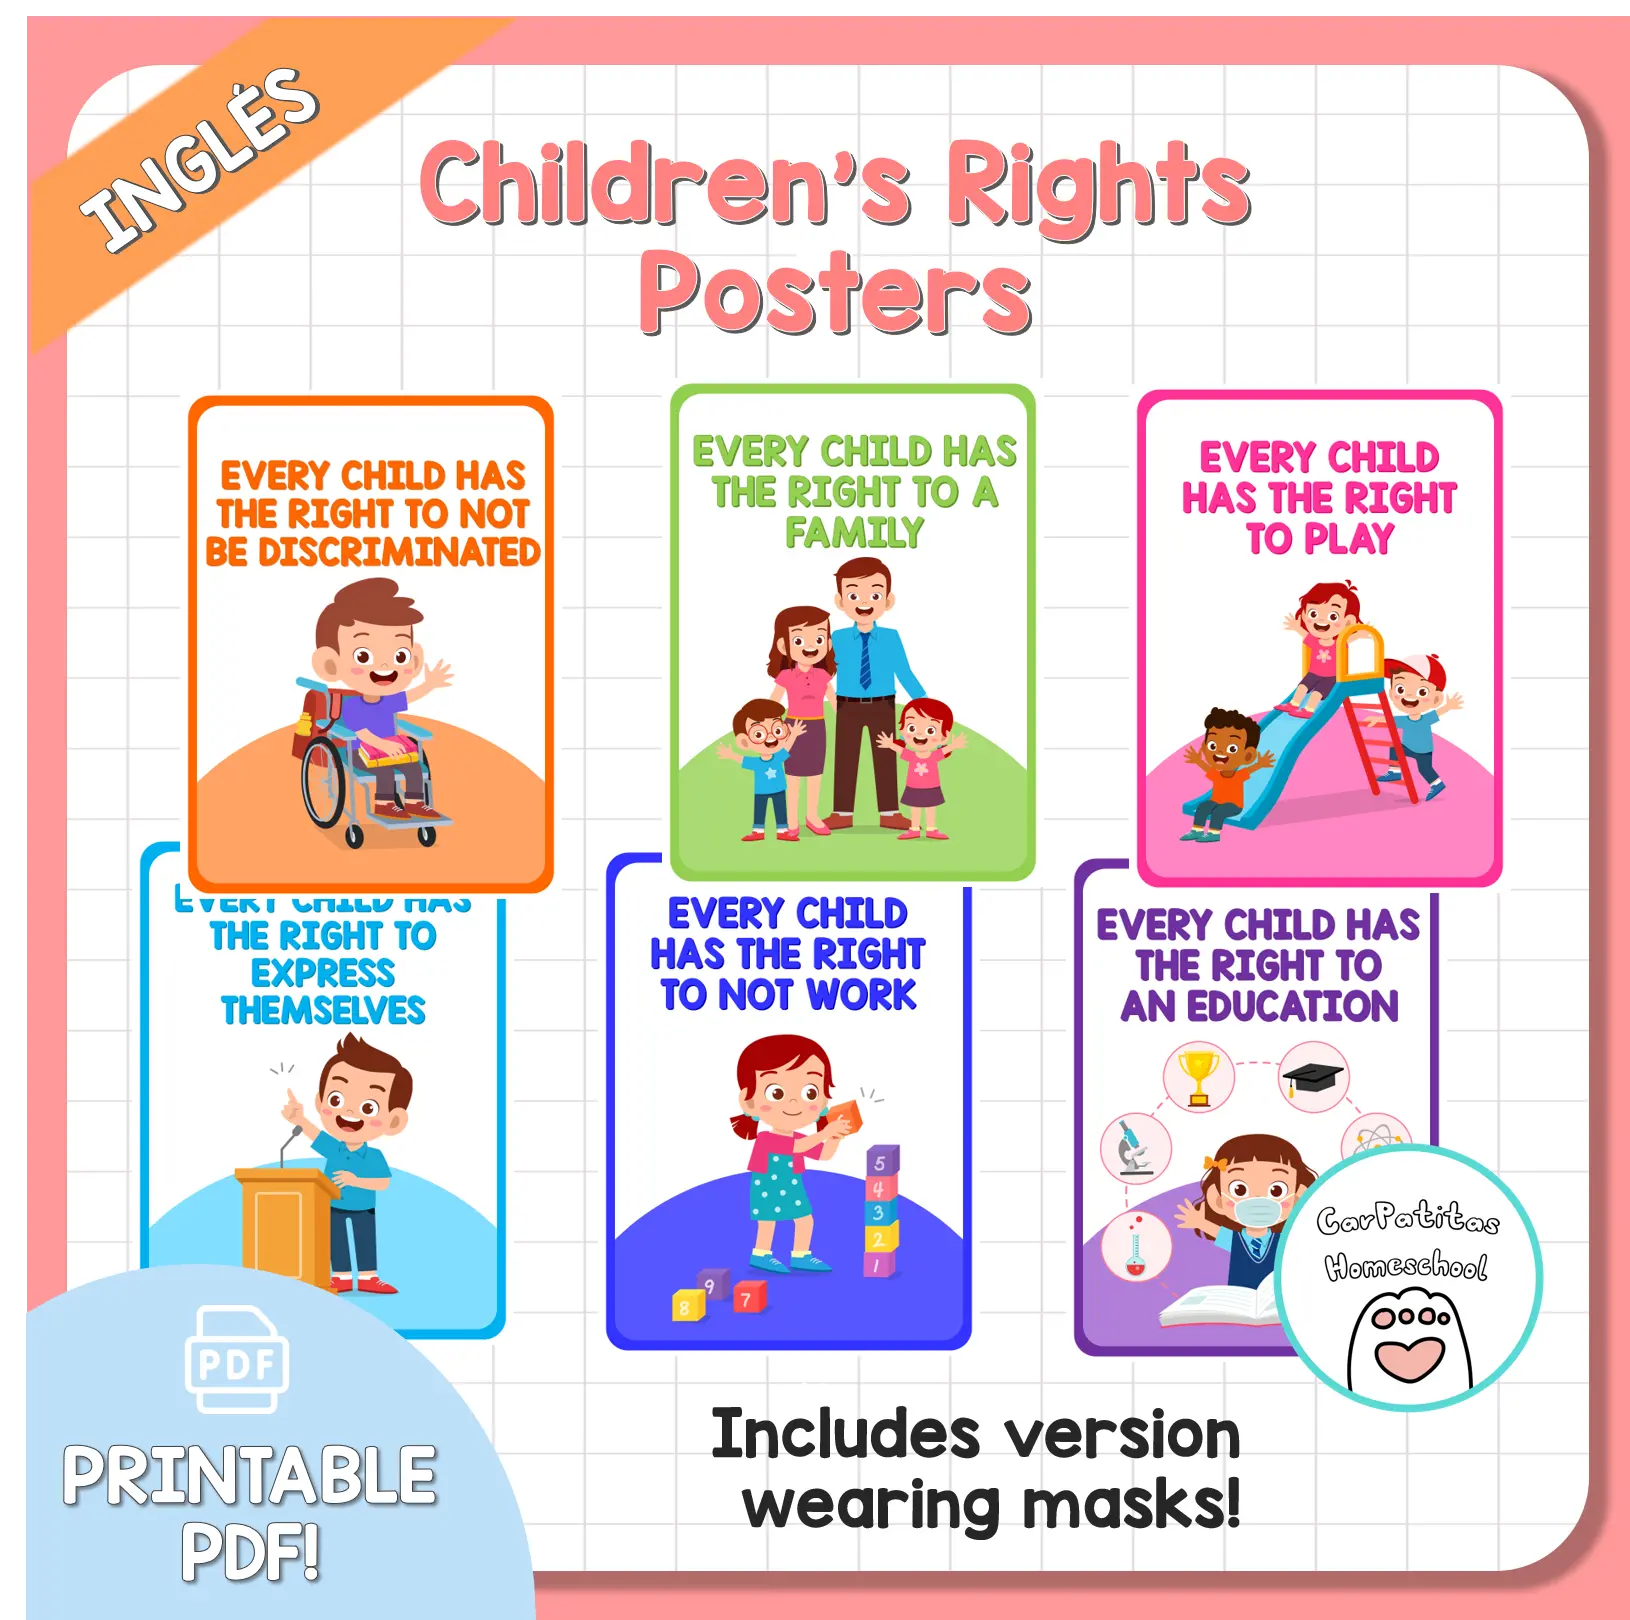 Children's Rights Posters